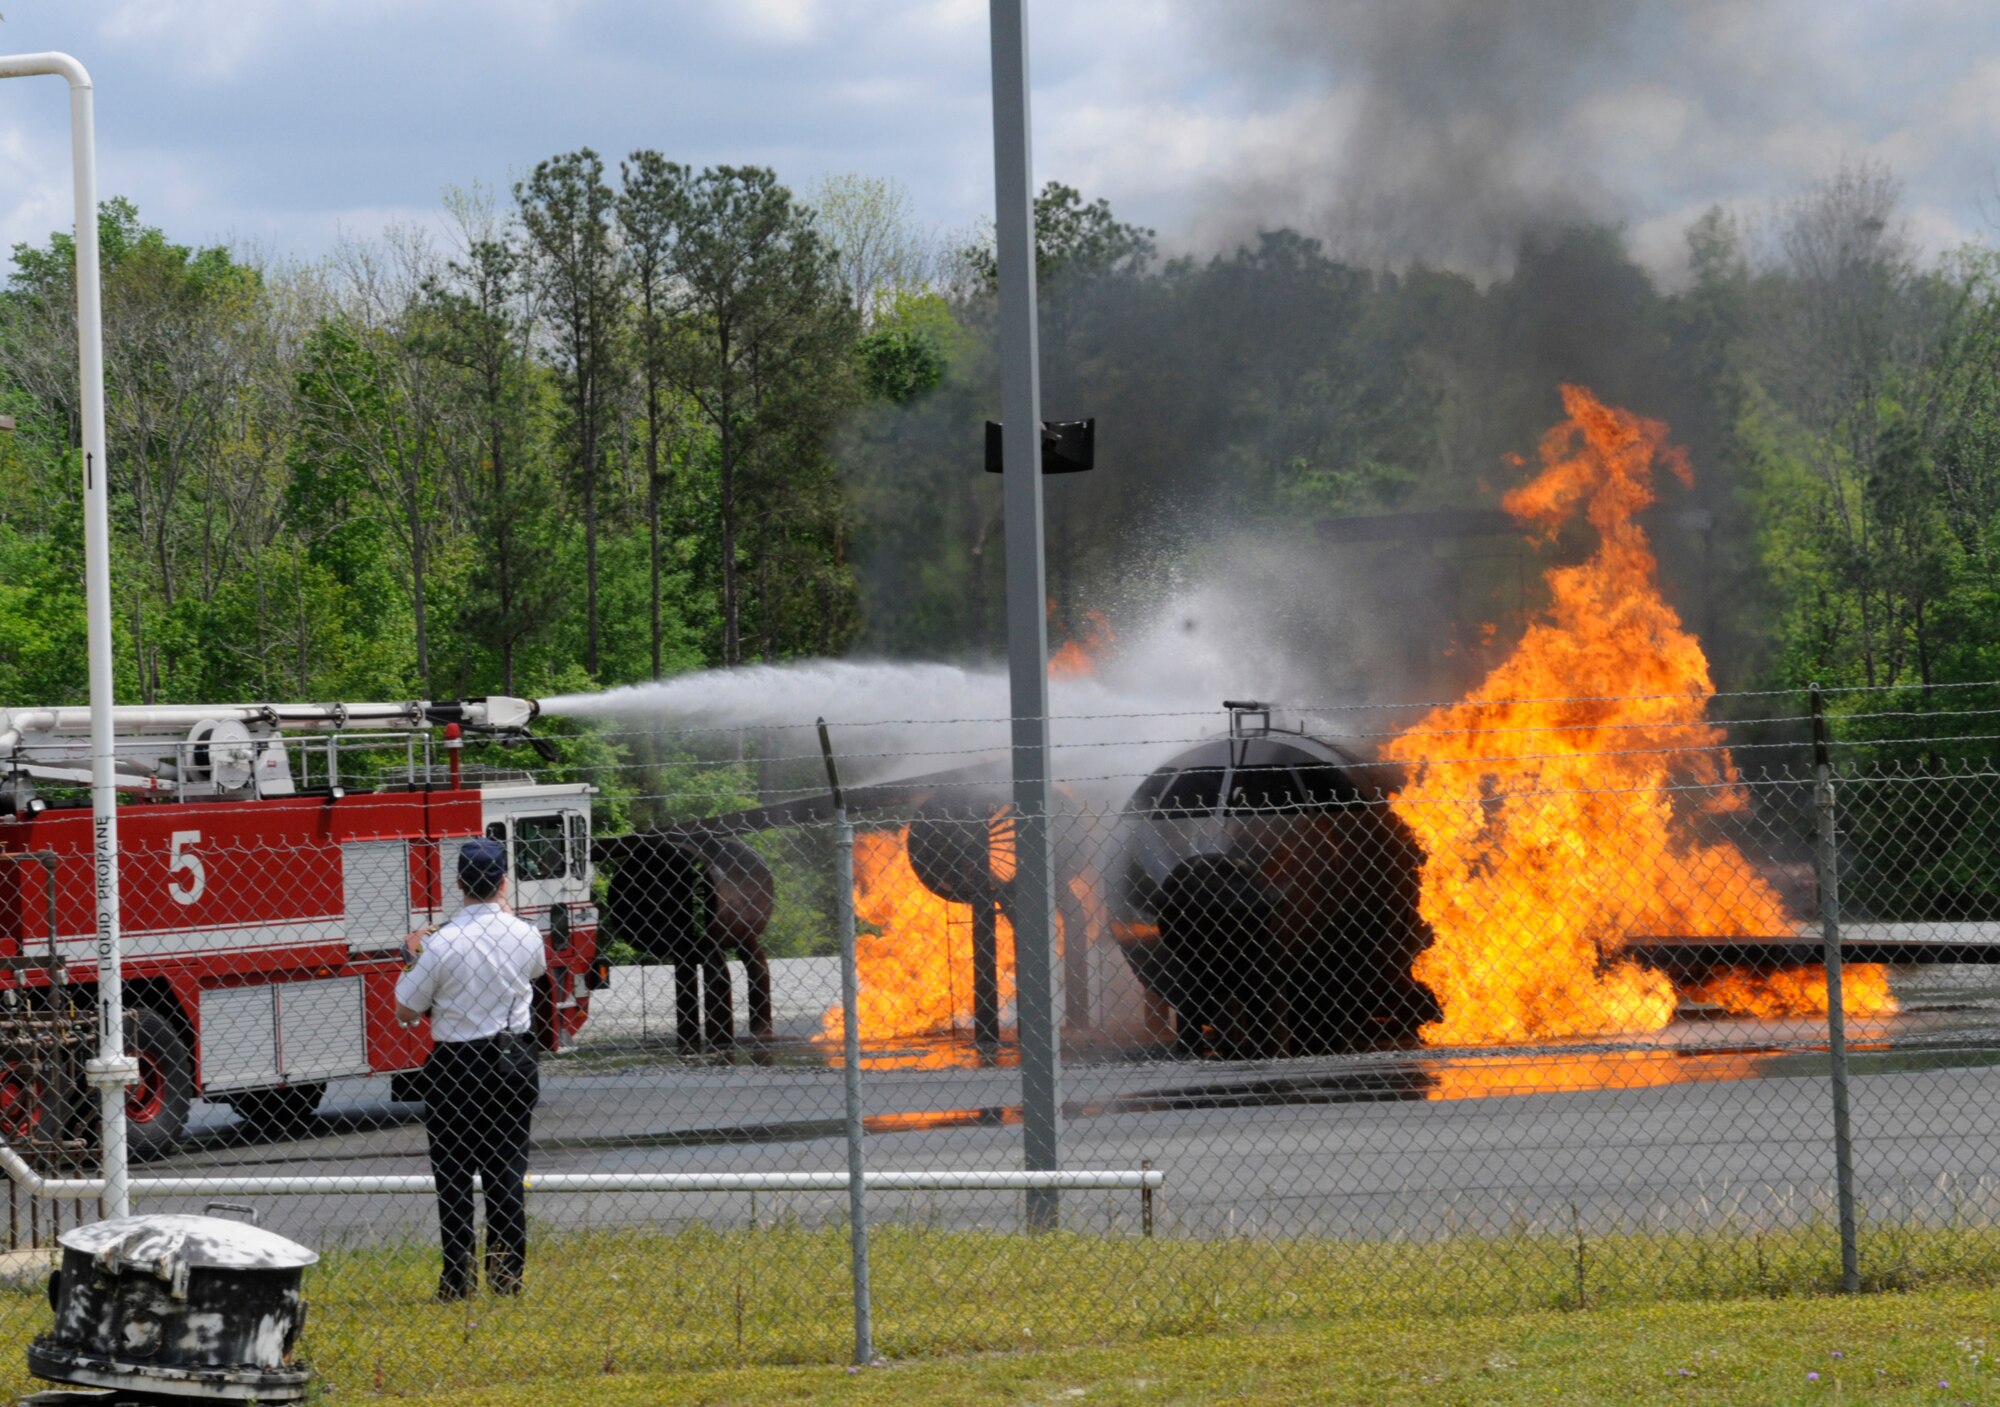 Robins firefighters extinguish a flaming C-130 as part of an Operational Readiness Inspection Emergency Management exercise. Robins Exercise Evaluation Team was being evaluated by Air Force Materiel Command Inspector Generals during this exercise. U. S. Air Force photo by Sue Sapp